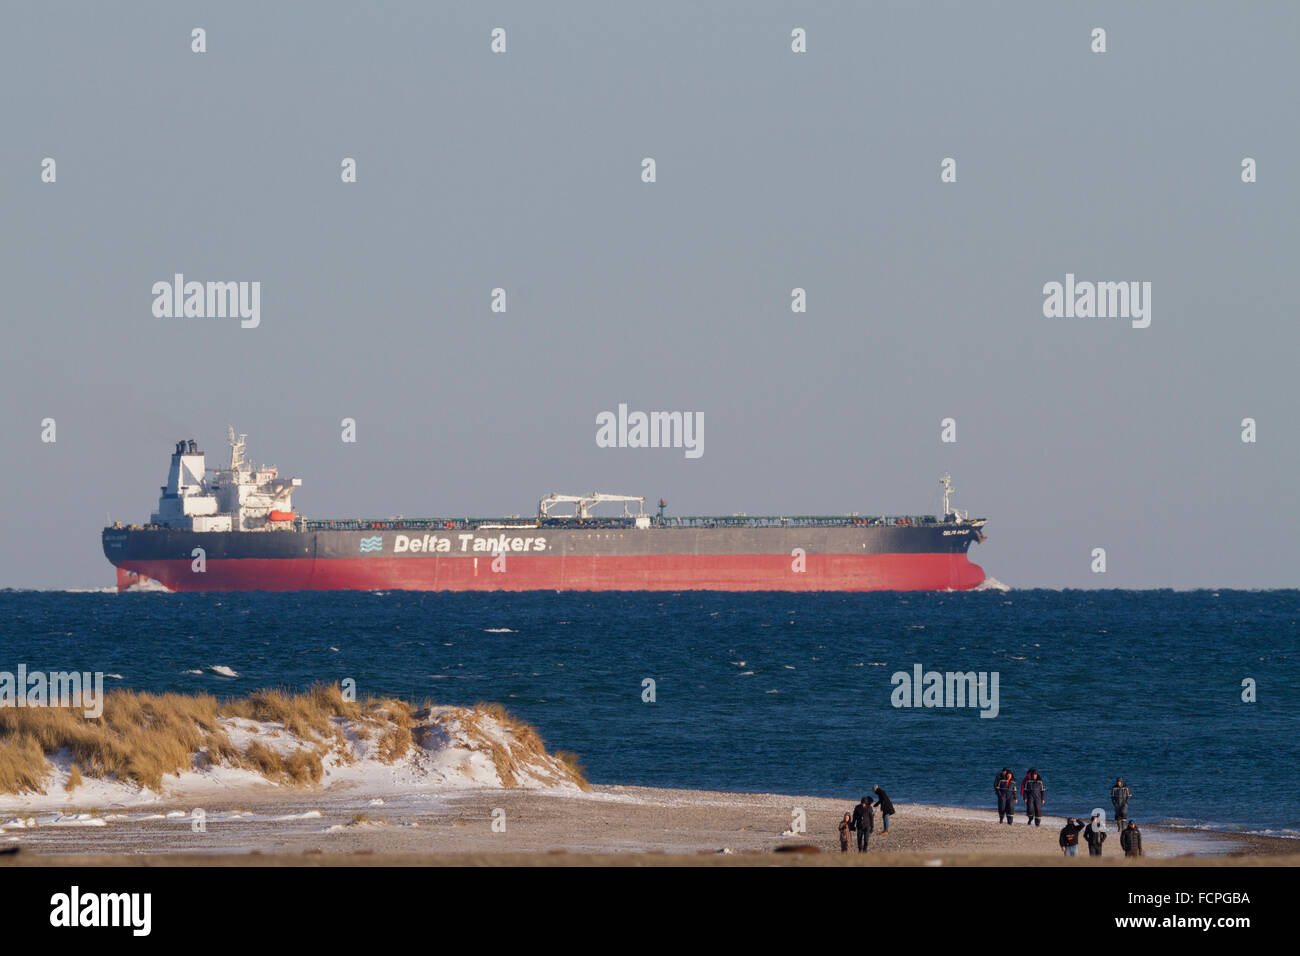 A Delta Tankers ship off Skagen. Stock Photo